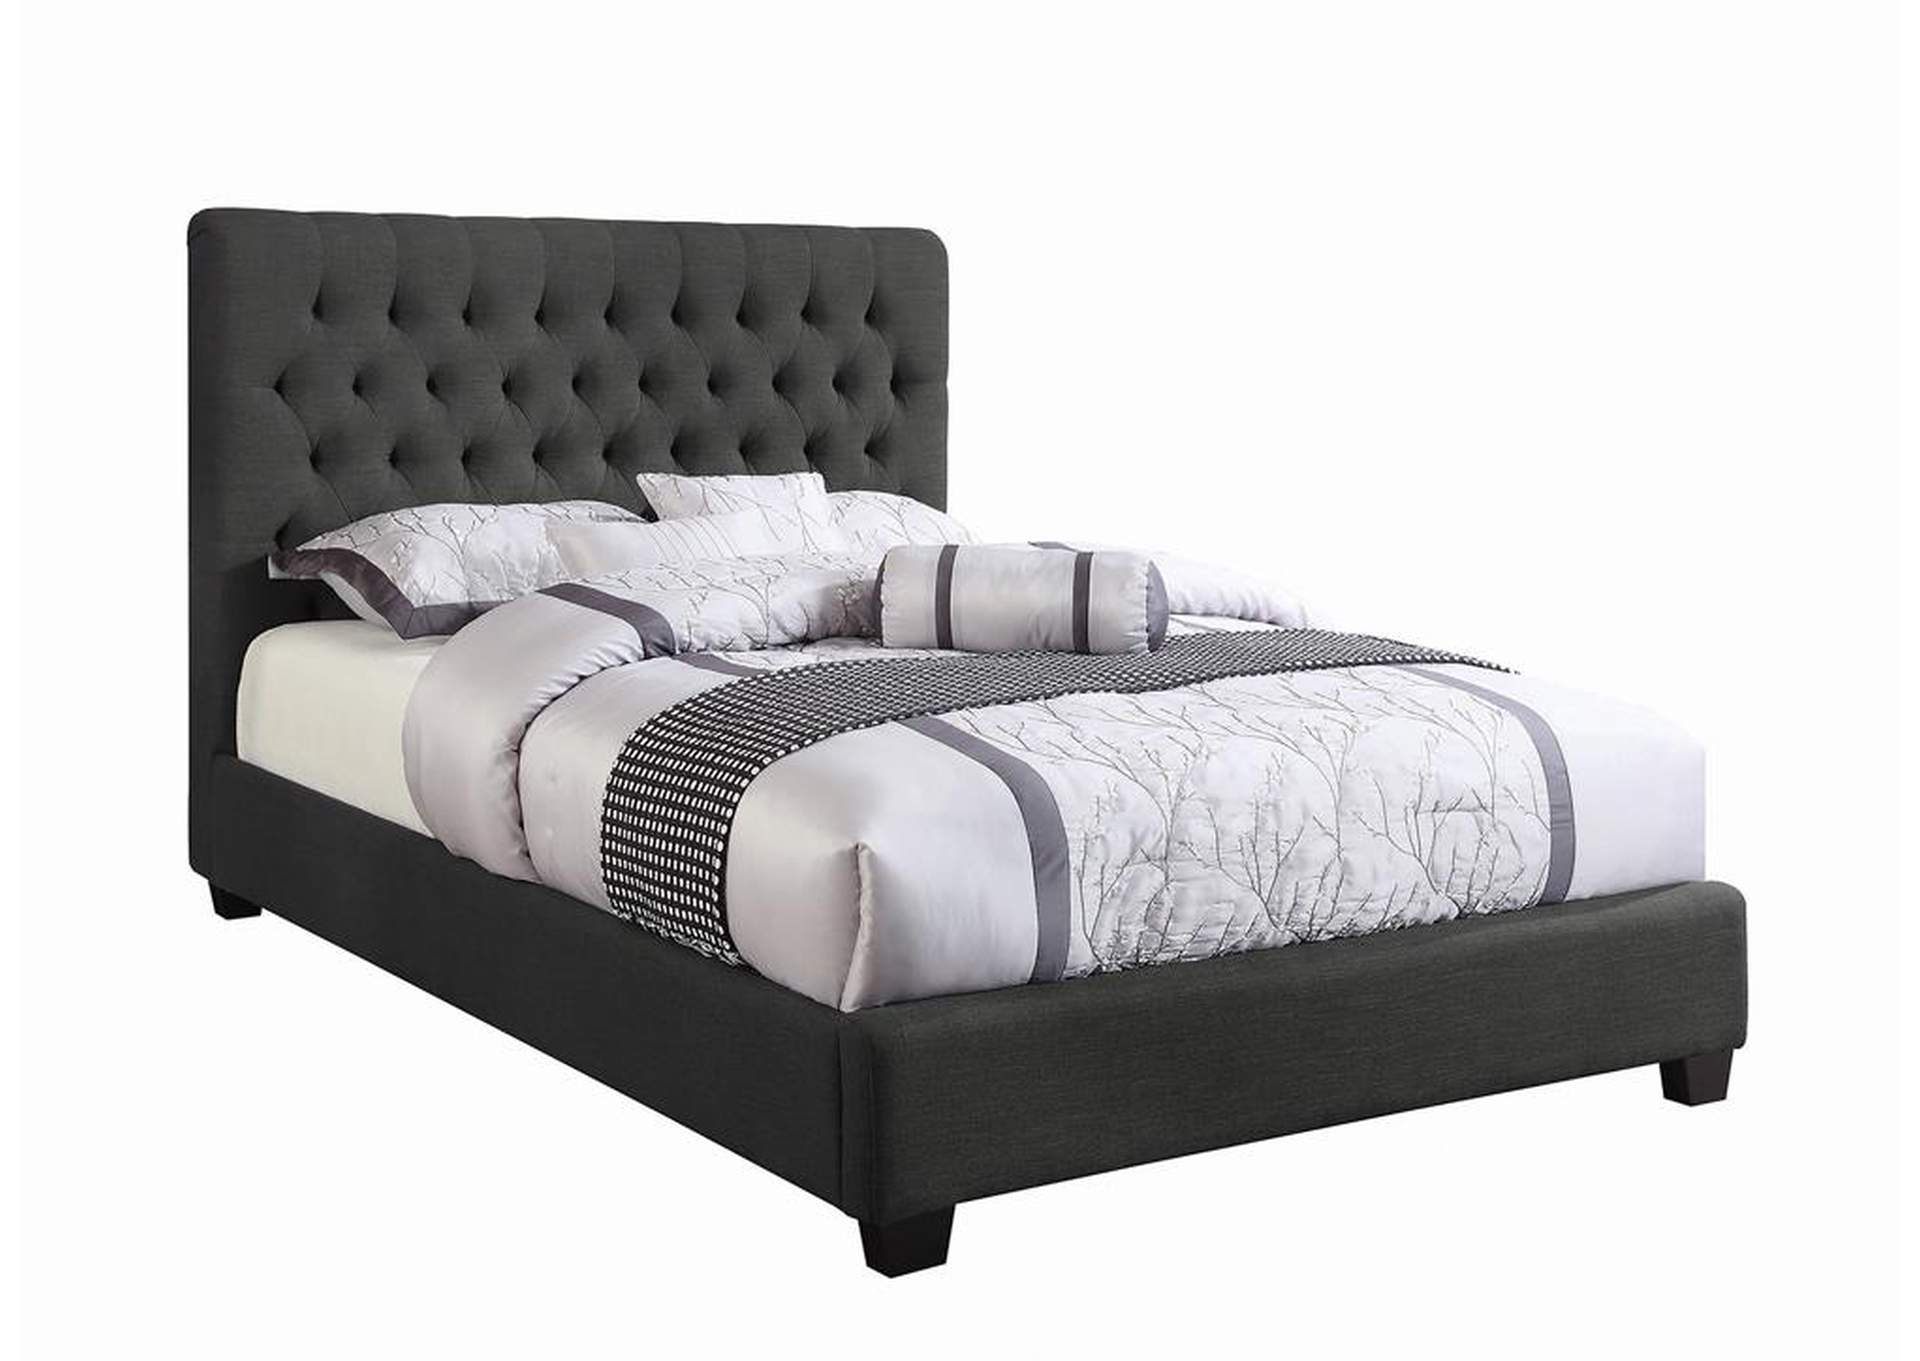 Chloe Charcoal Upholstered Queen Bed,Coaster Furniture